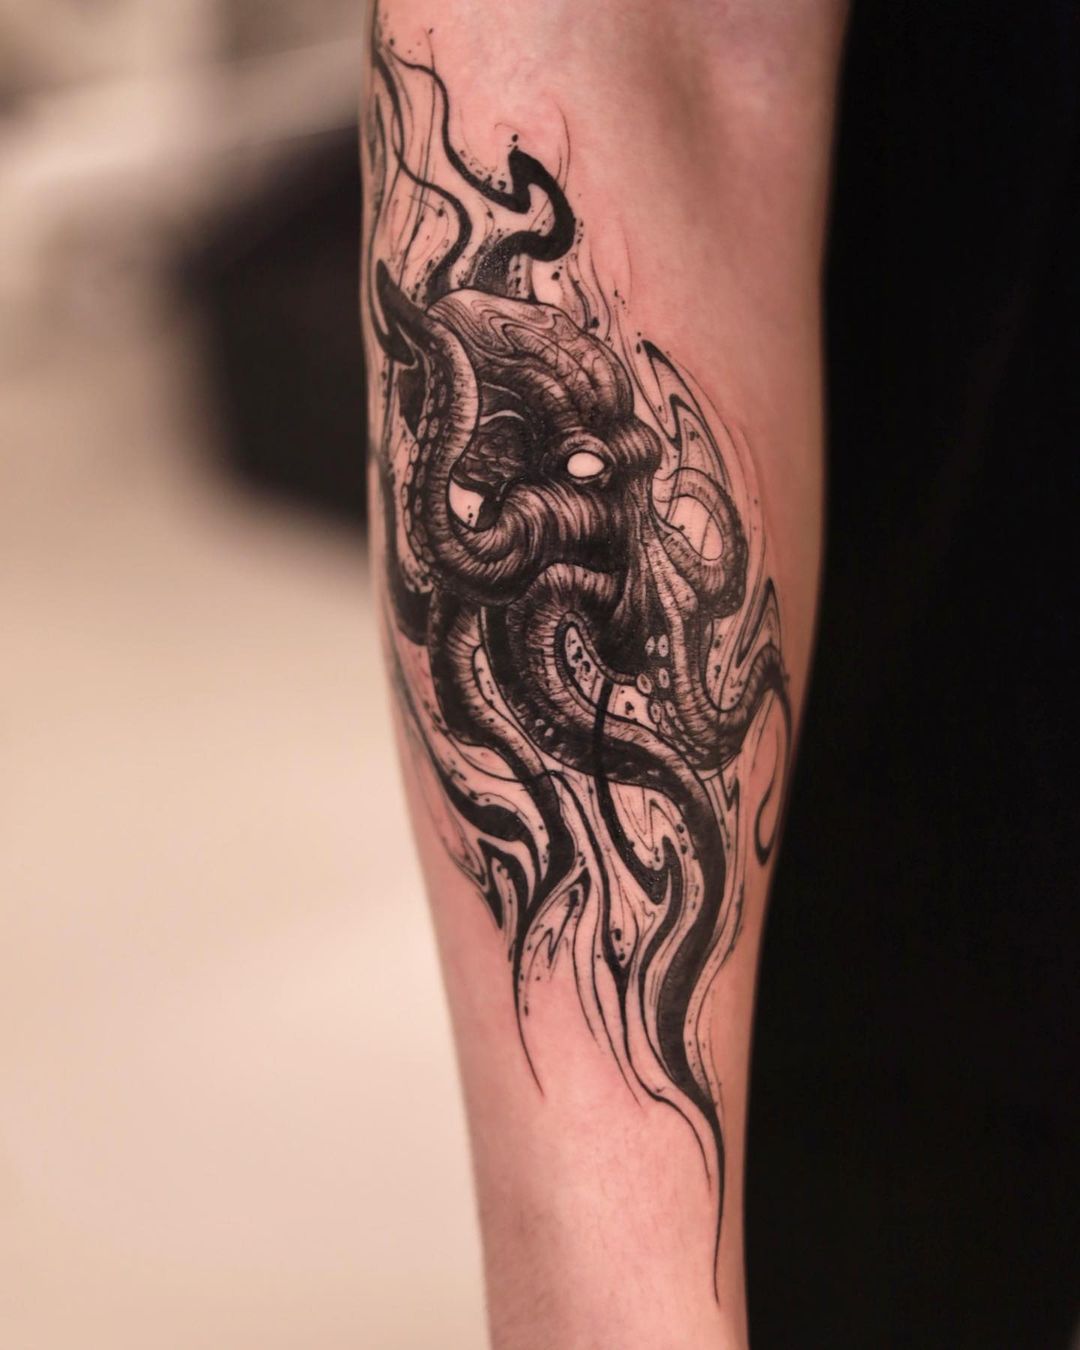 Black and white octopus design by voldblk